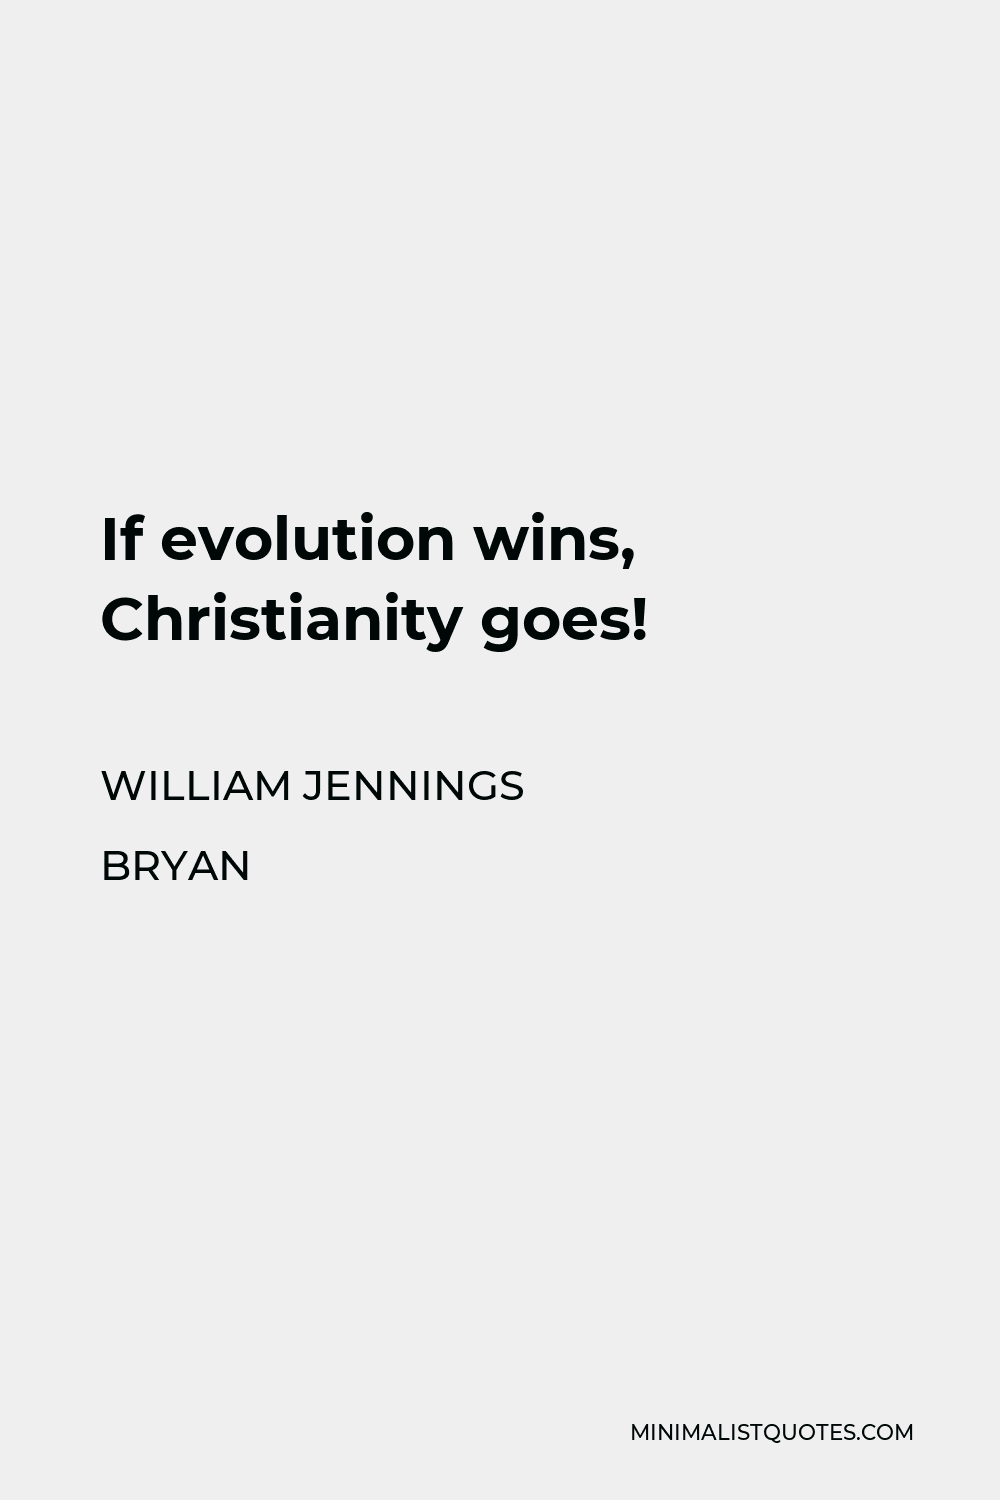 William Jennings Bryan Quote - If evolution wins, Christianity goes!